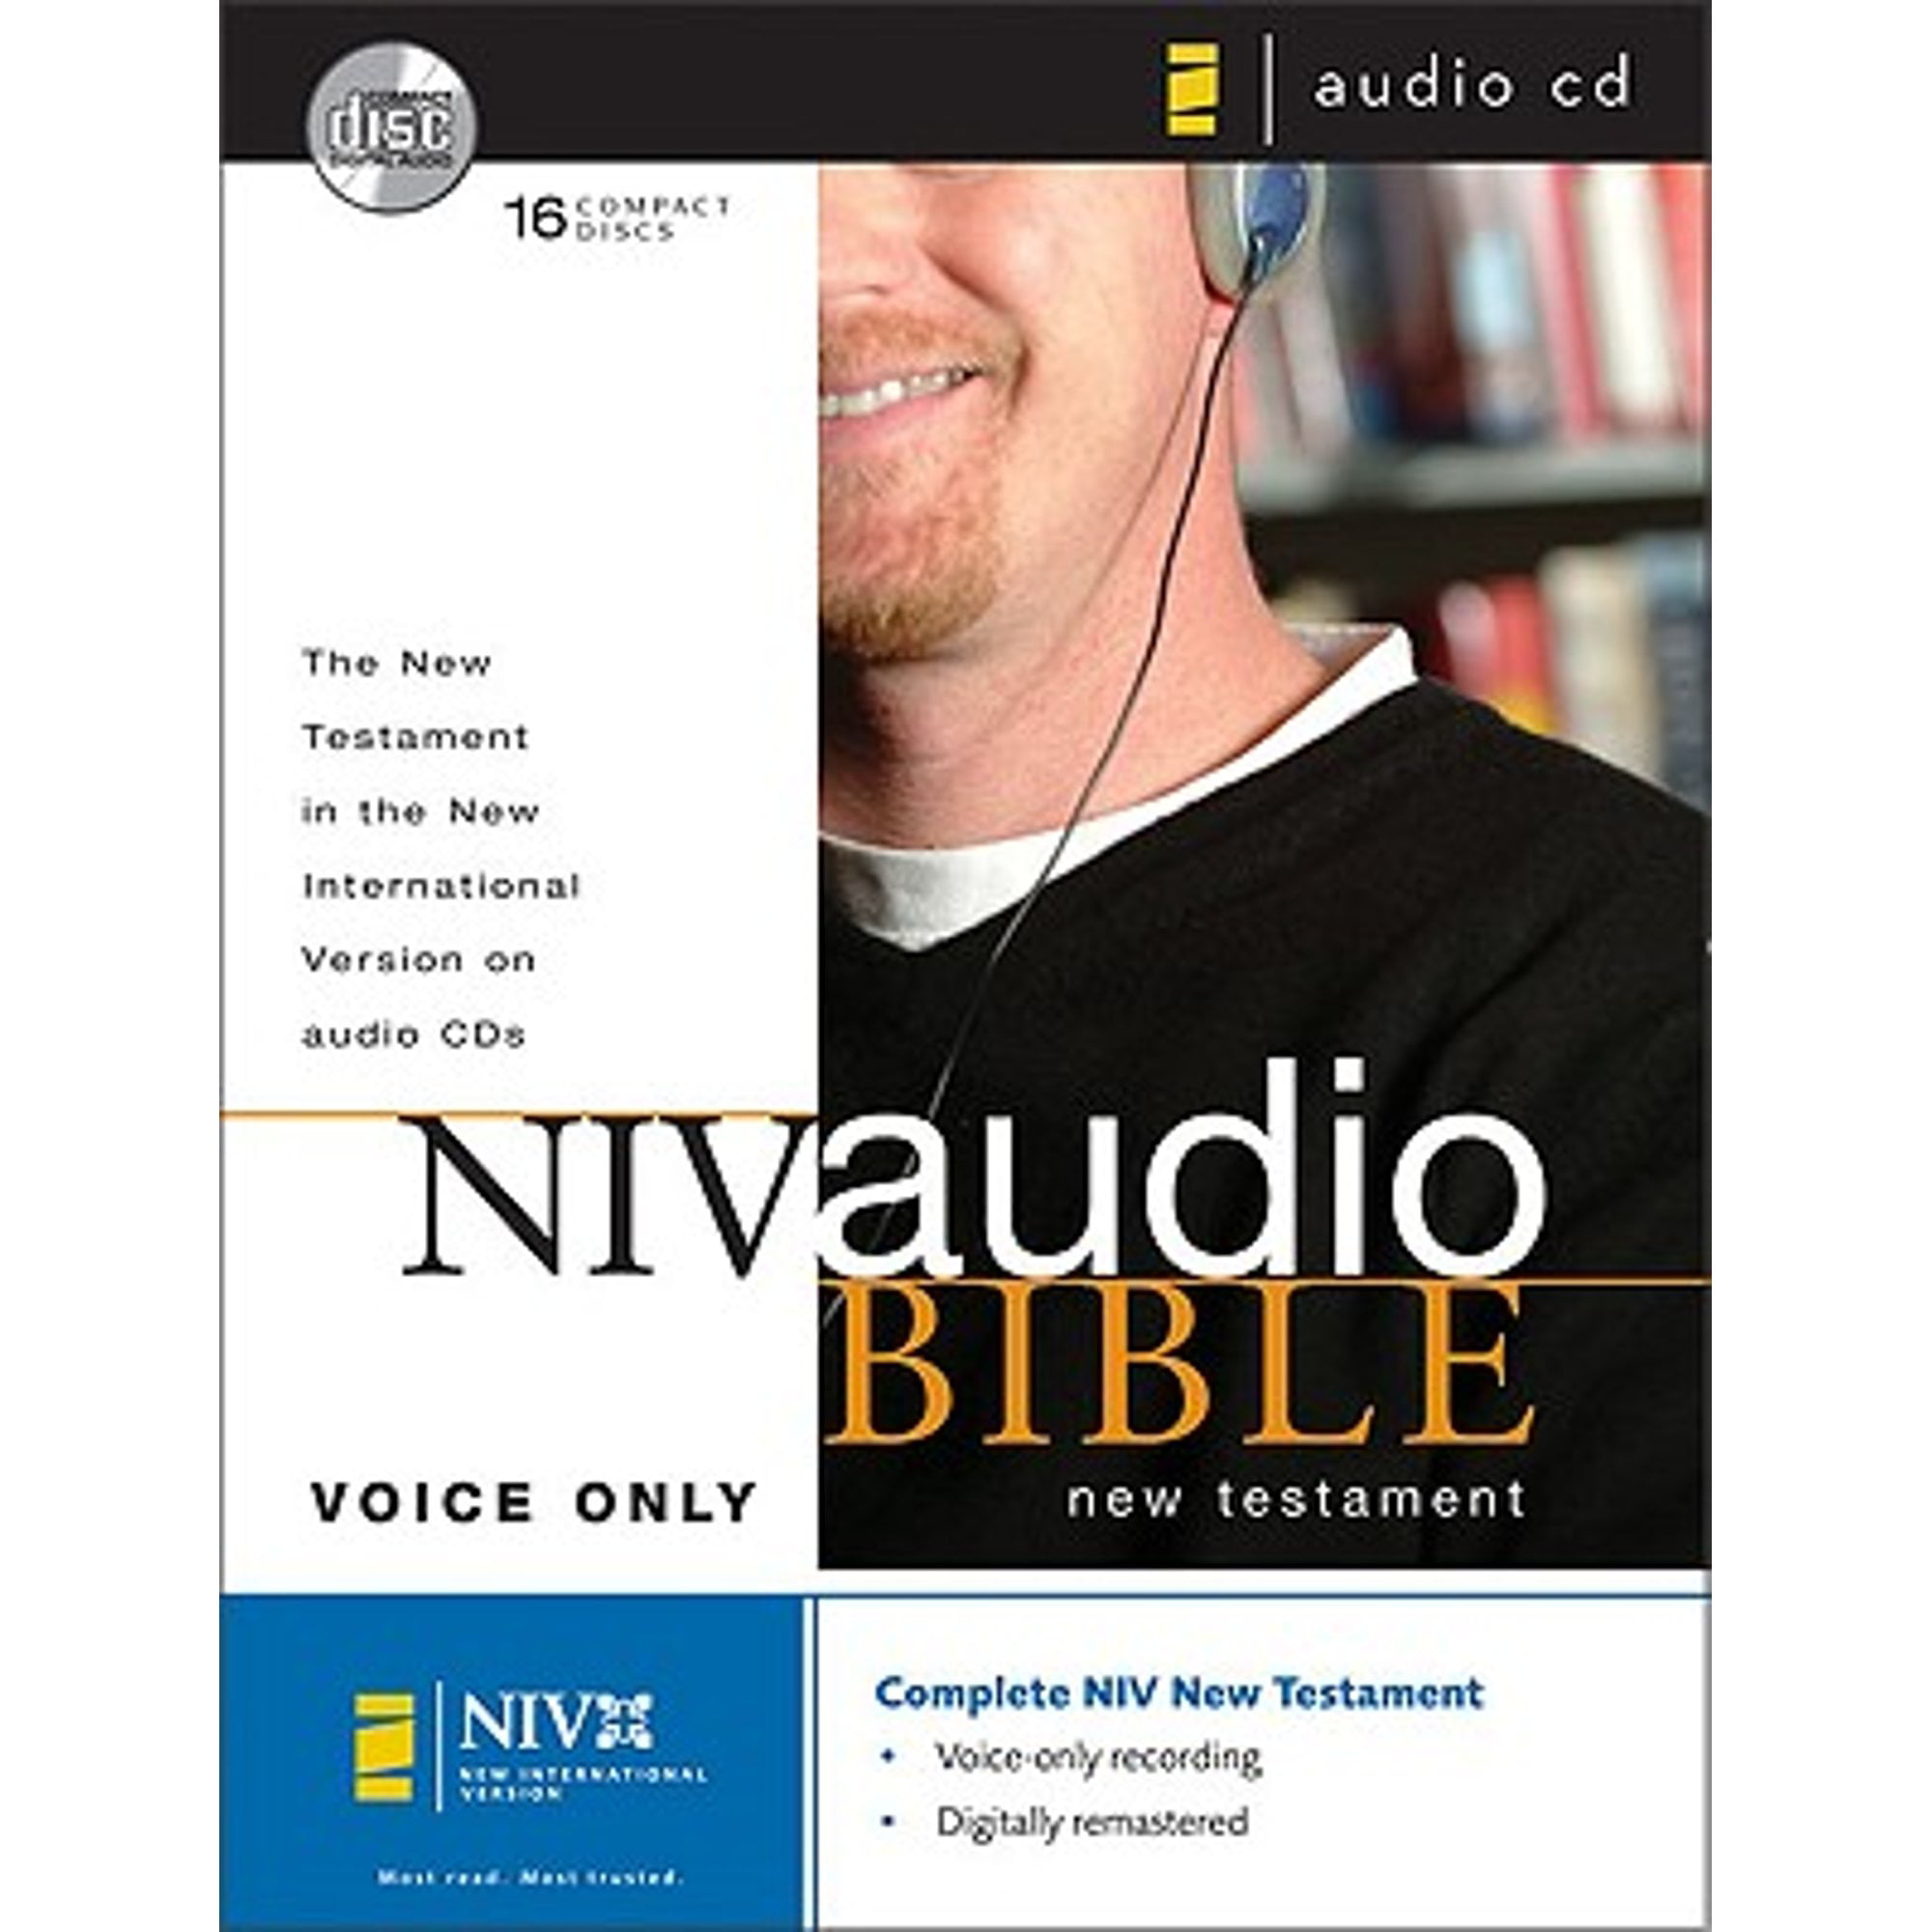 Pre-Owned NIV Audio Bible New Testament Voice Only CD (Audiobook 9780310920526) by Zondervan Publishing